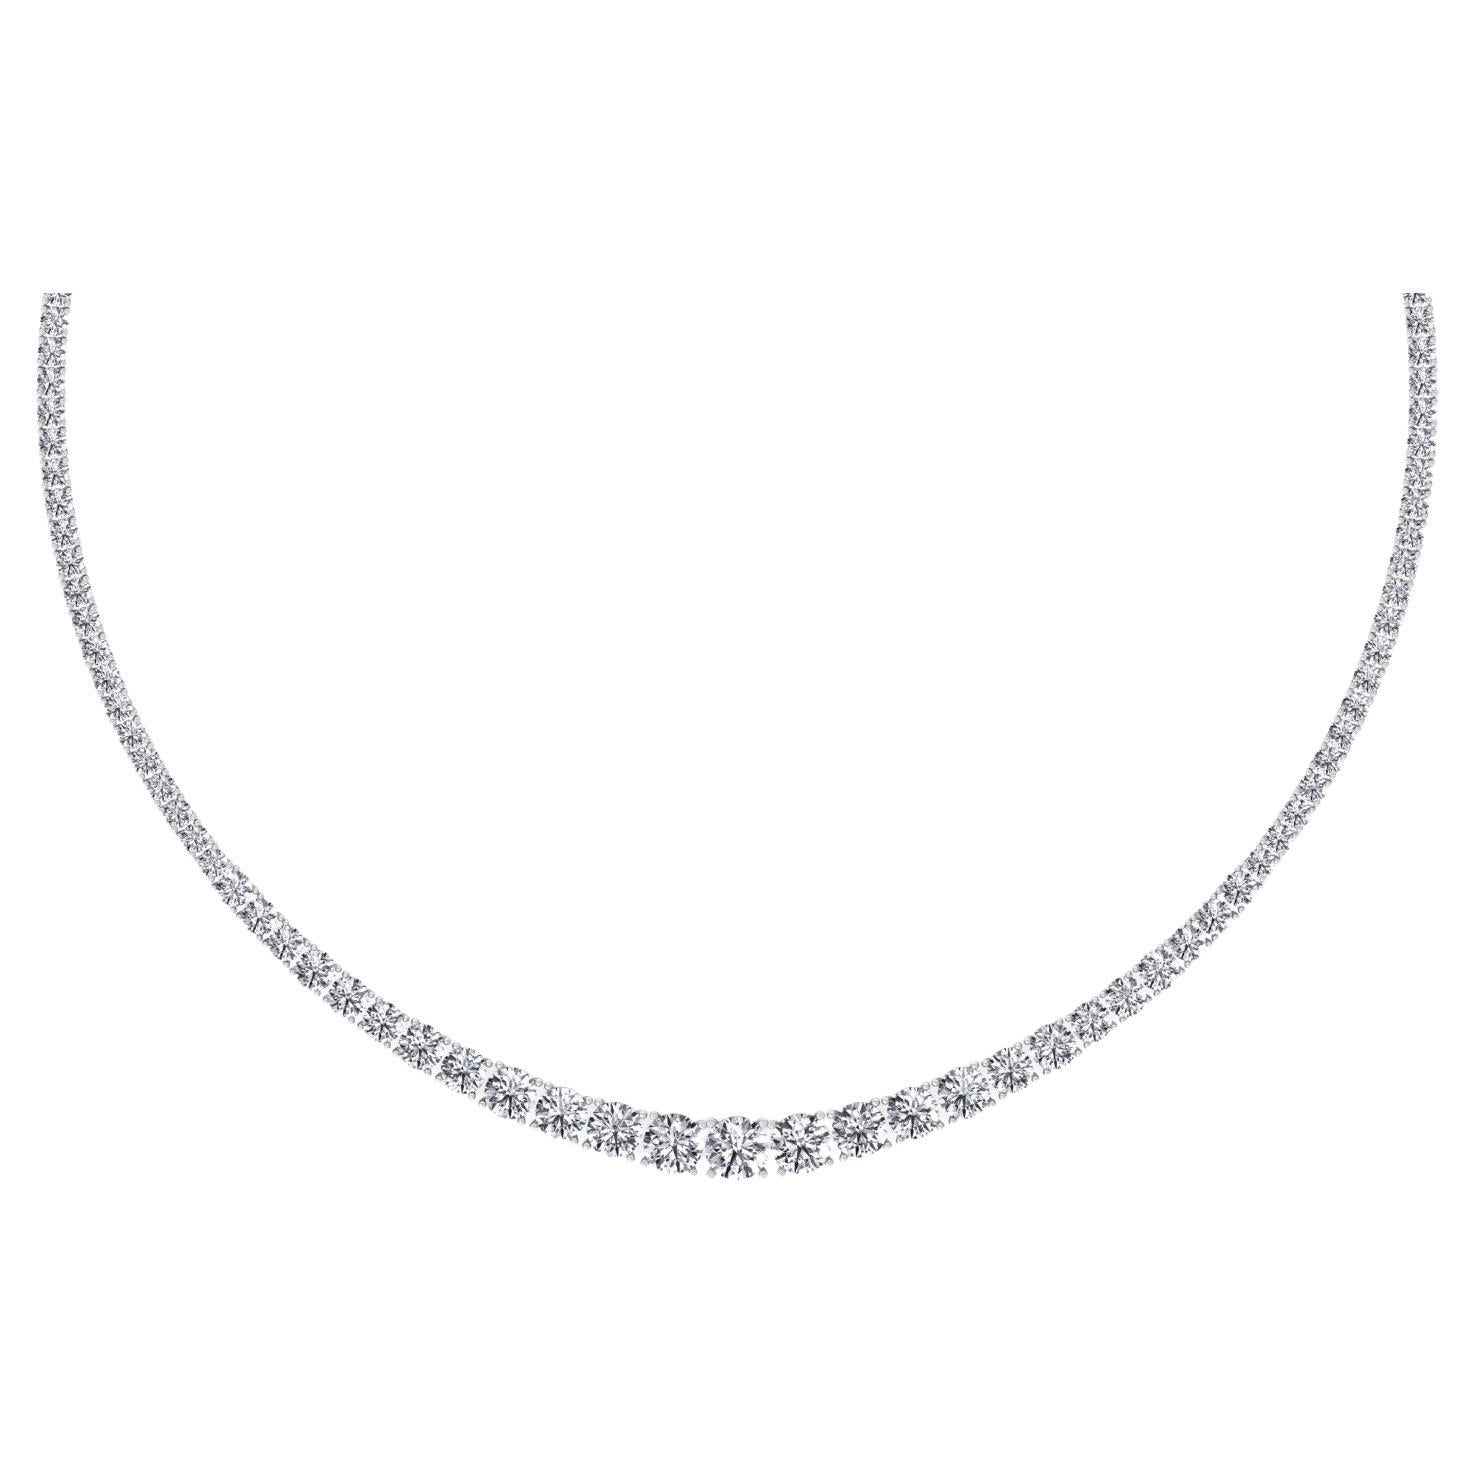 6.2 Carat Graduated Diamond Tennis Necklace in 14k White Gold by Gem Jewelers Co For Sale